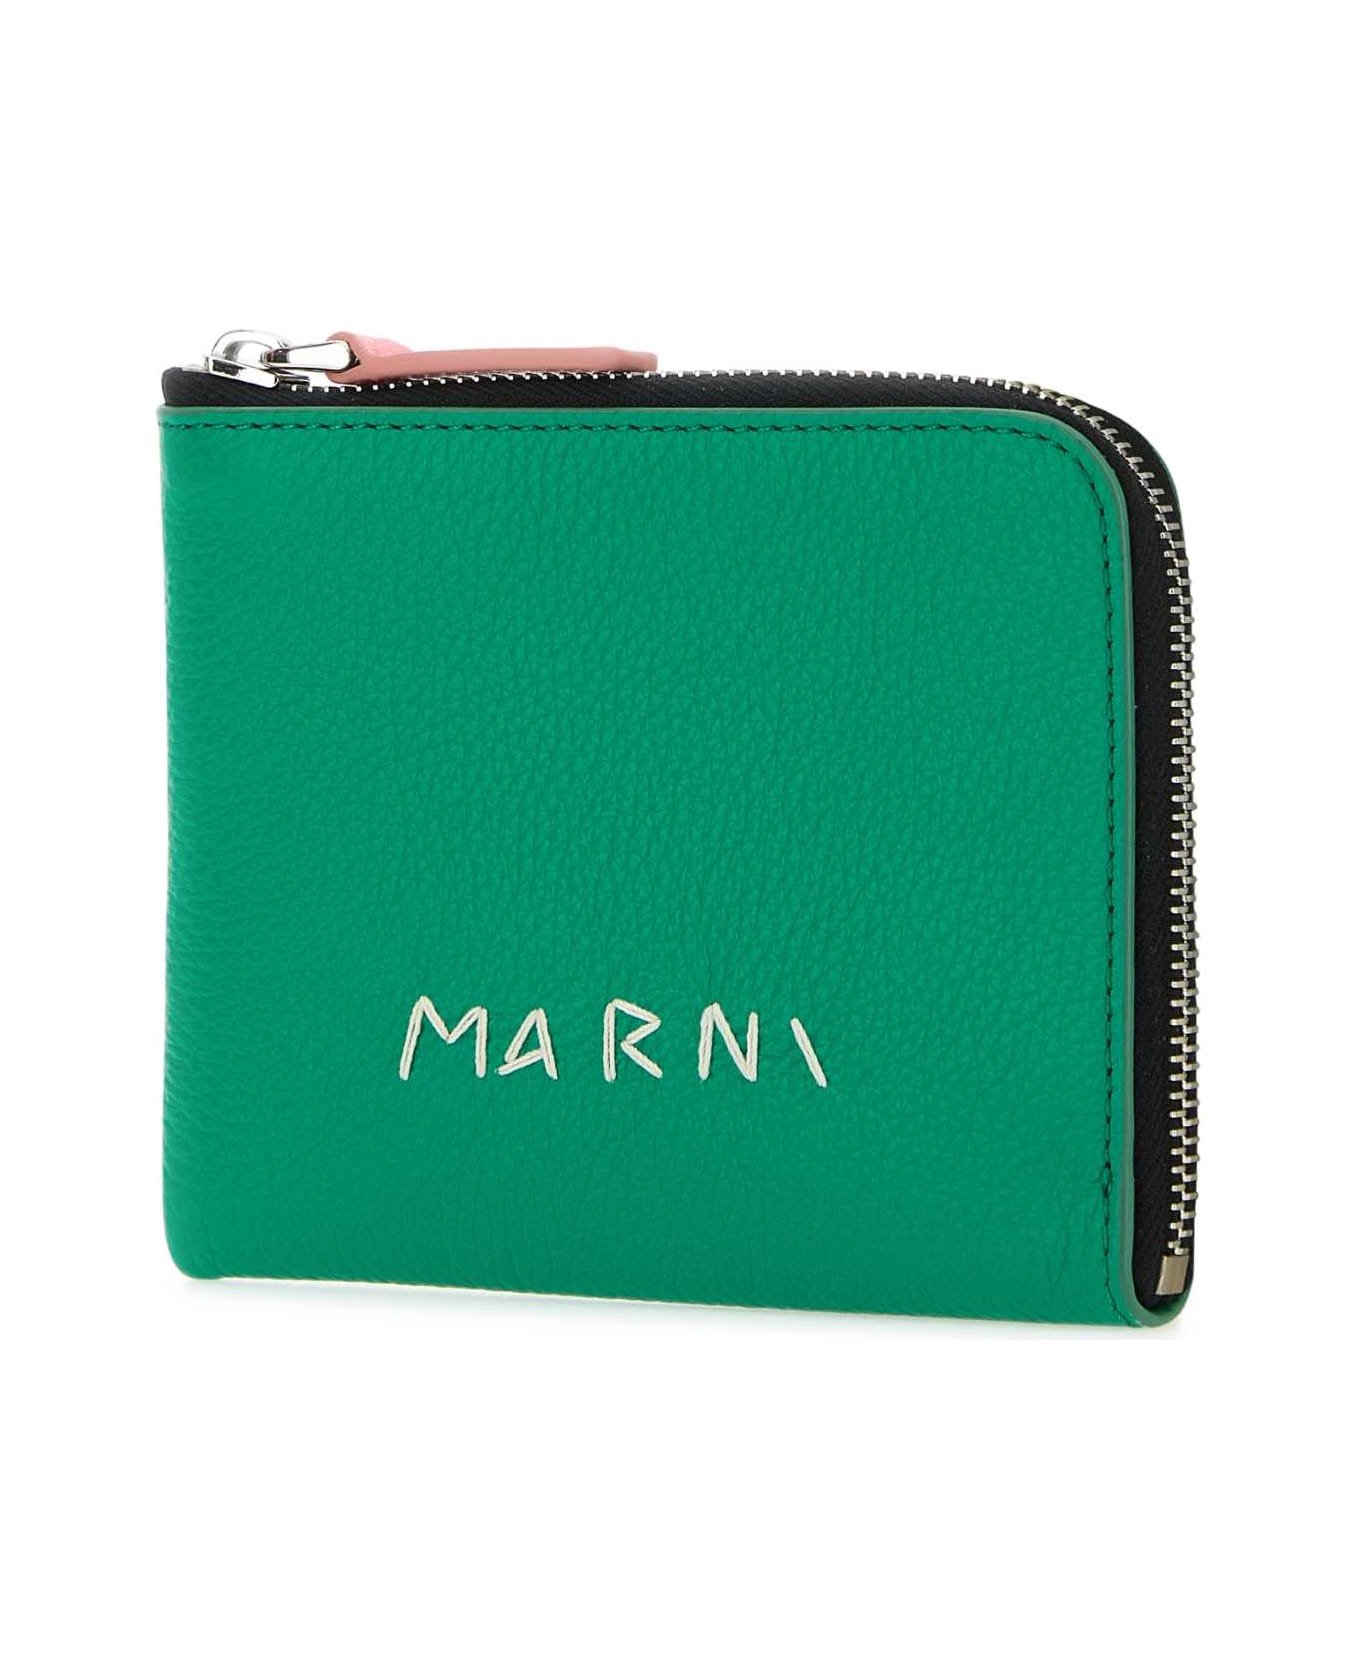 Marni Green Leather Wallet - SEAGREEN 財布